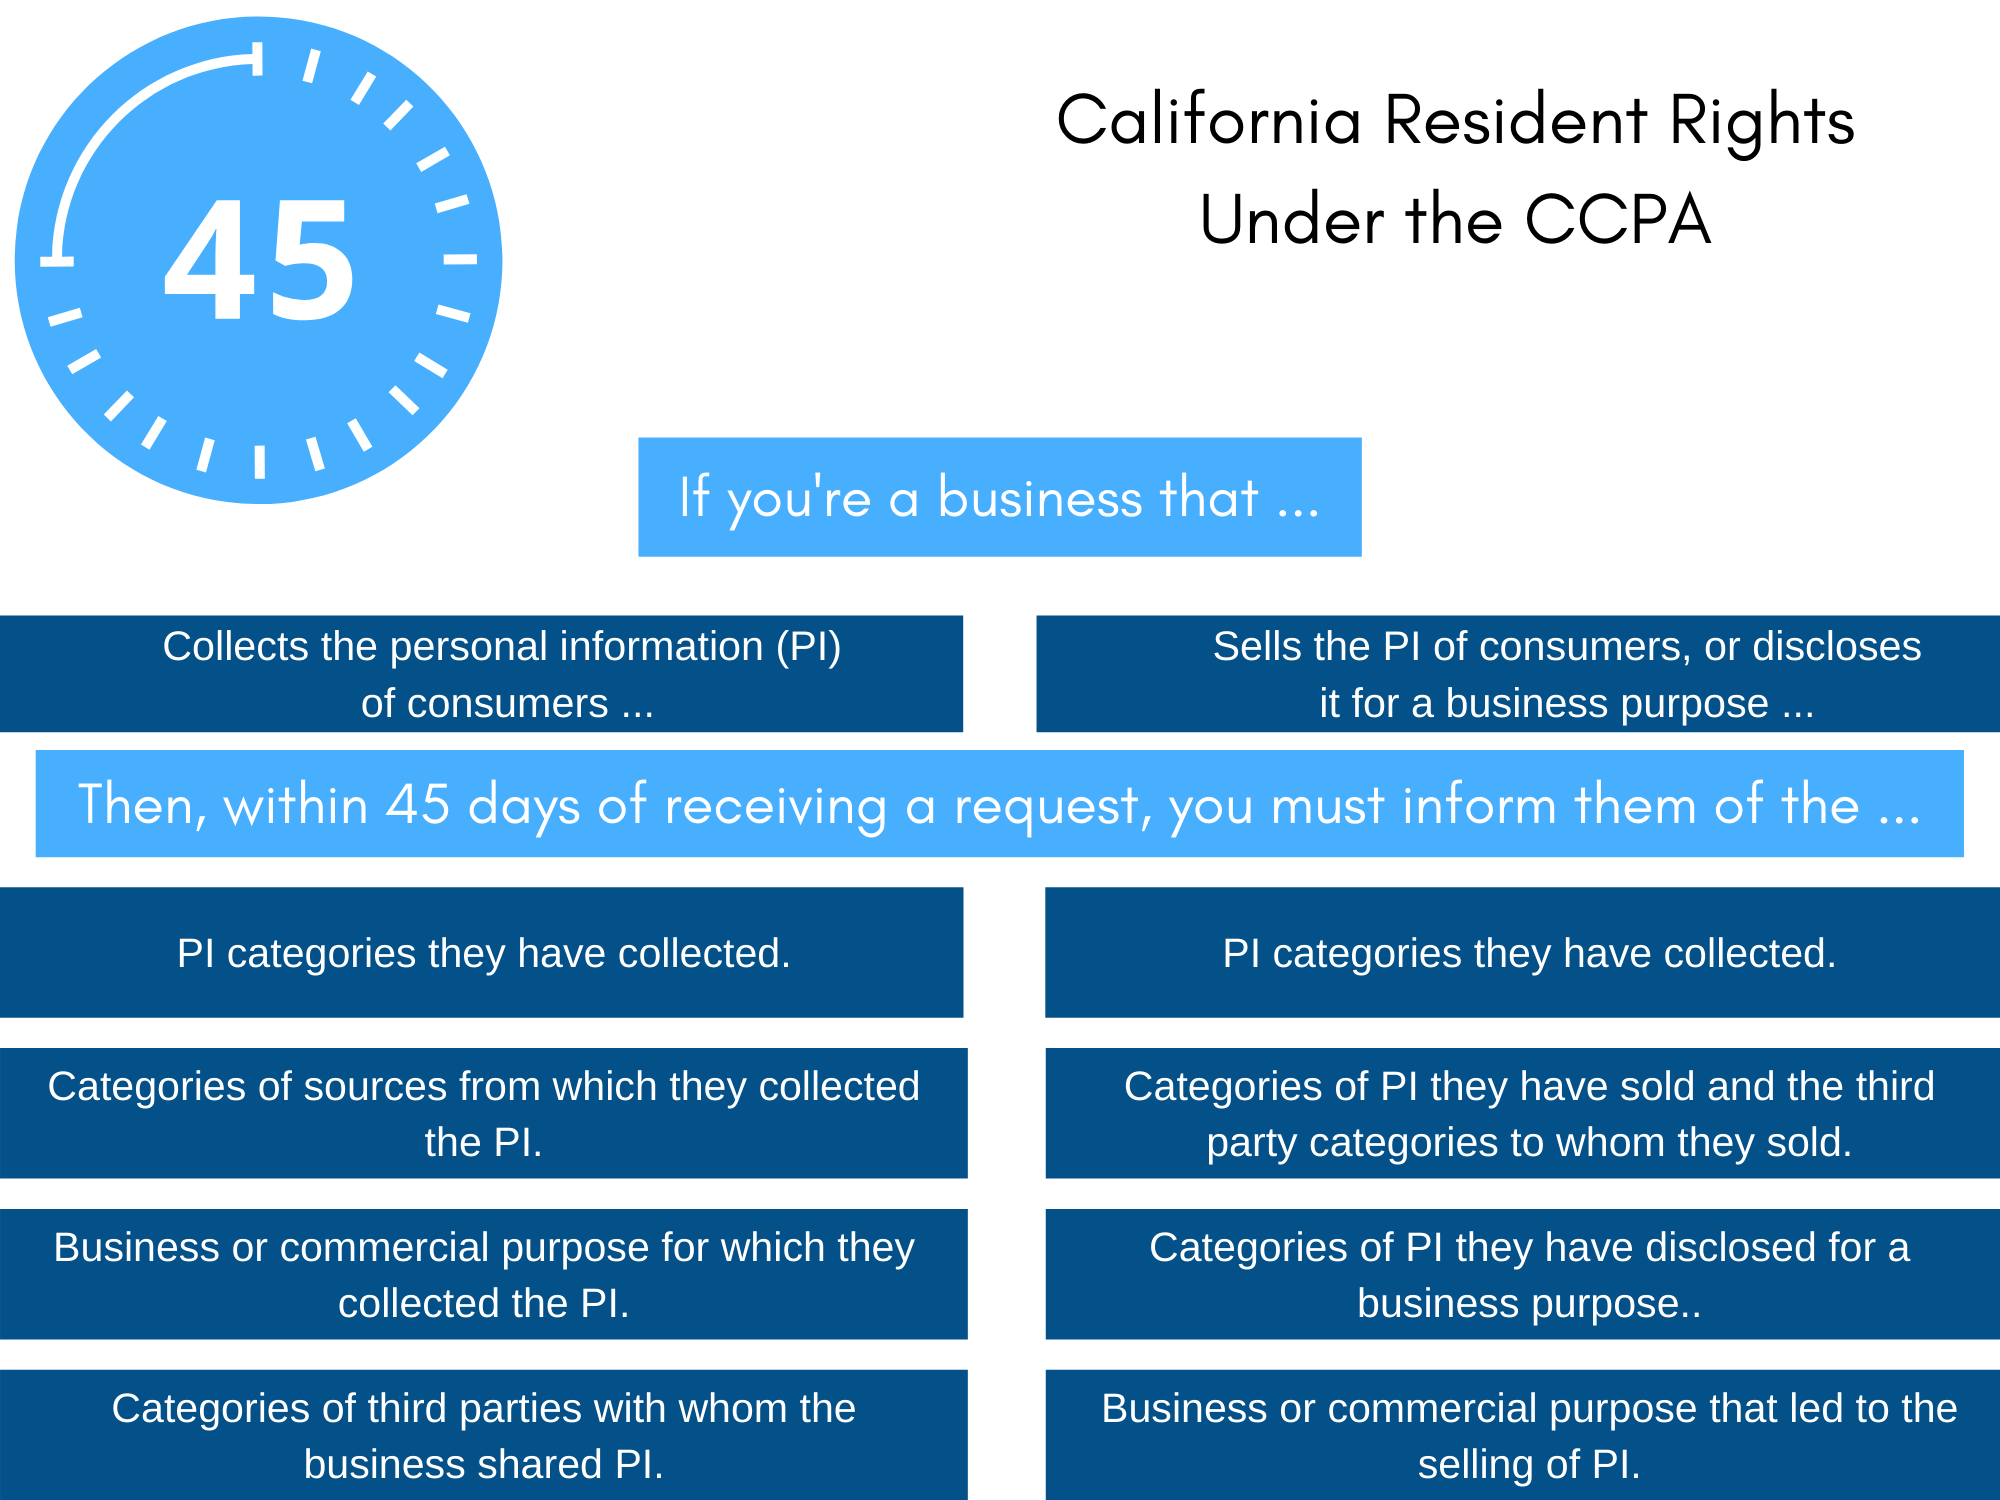 Businesses that process California resident data must comply to these rules.